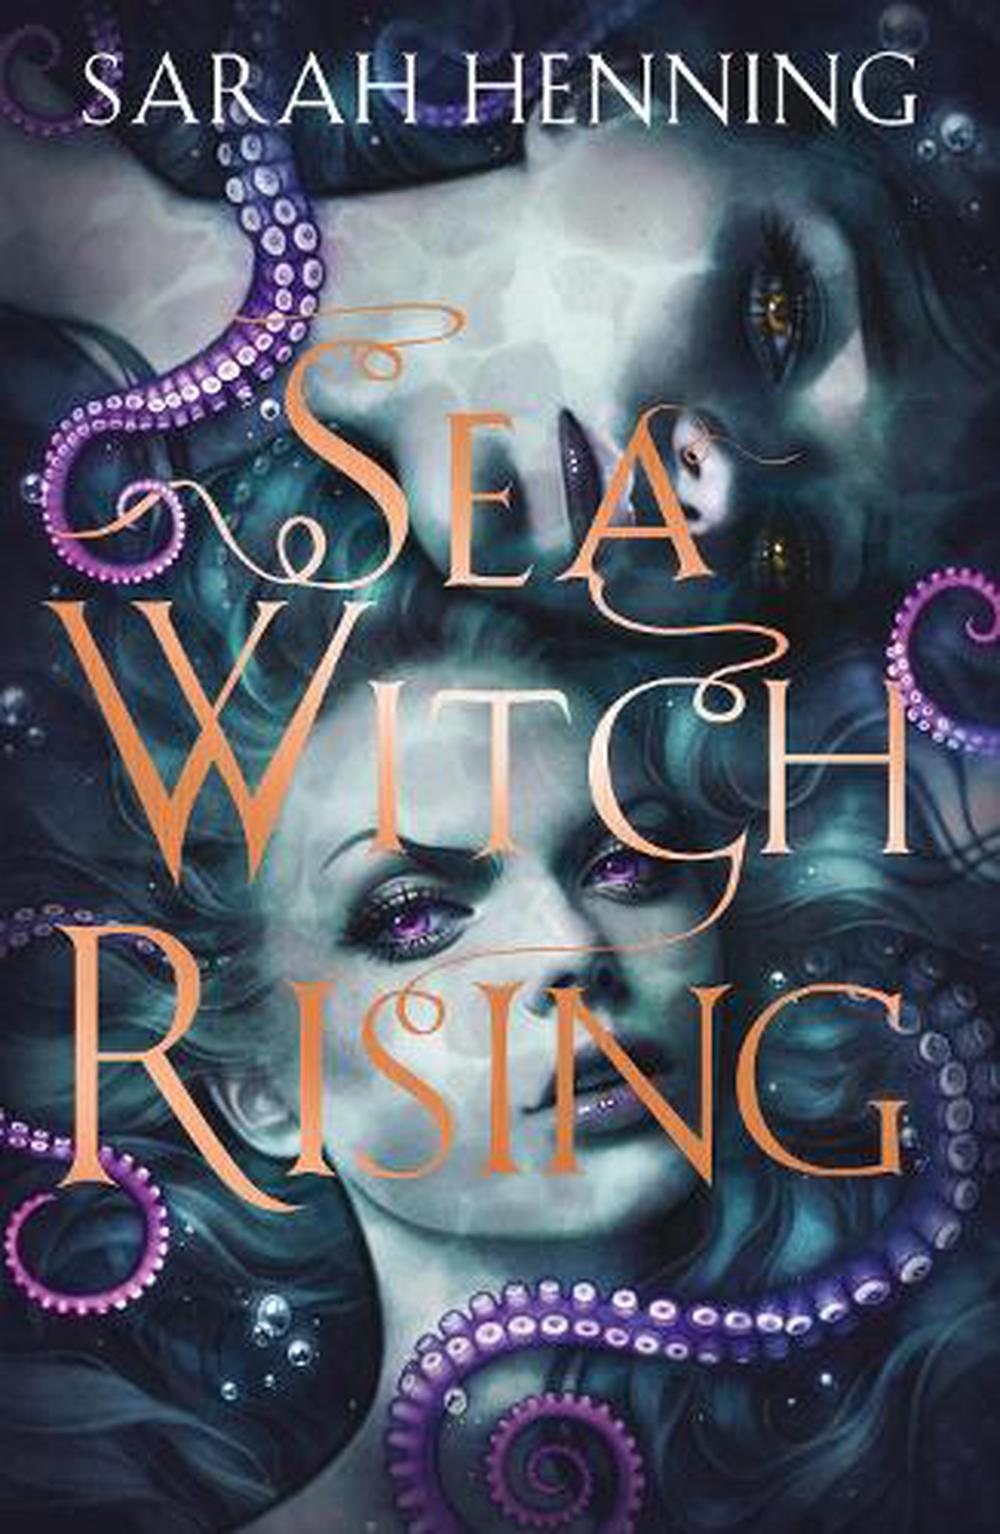 Sea Witch Rising by Sarah Henning (English) Paperback Book Free ...